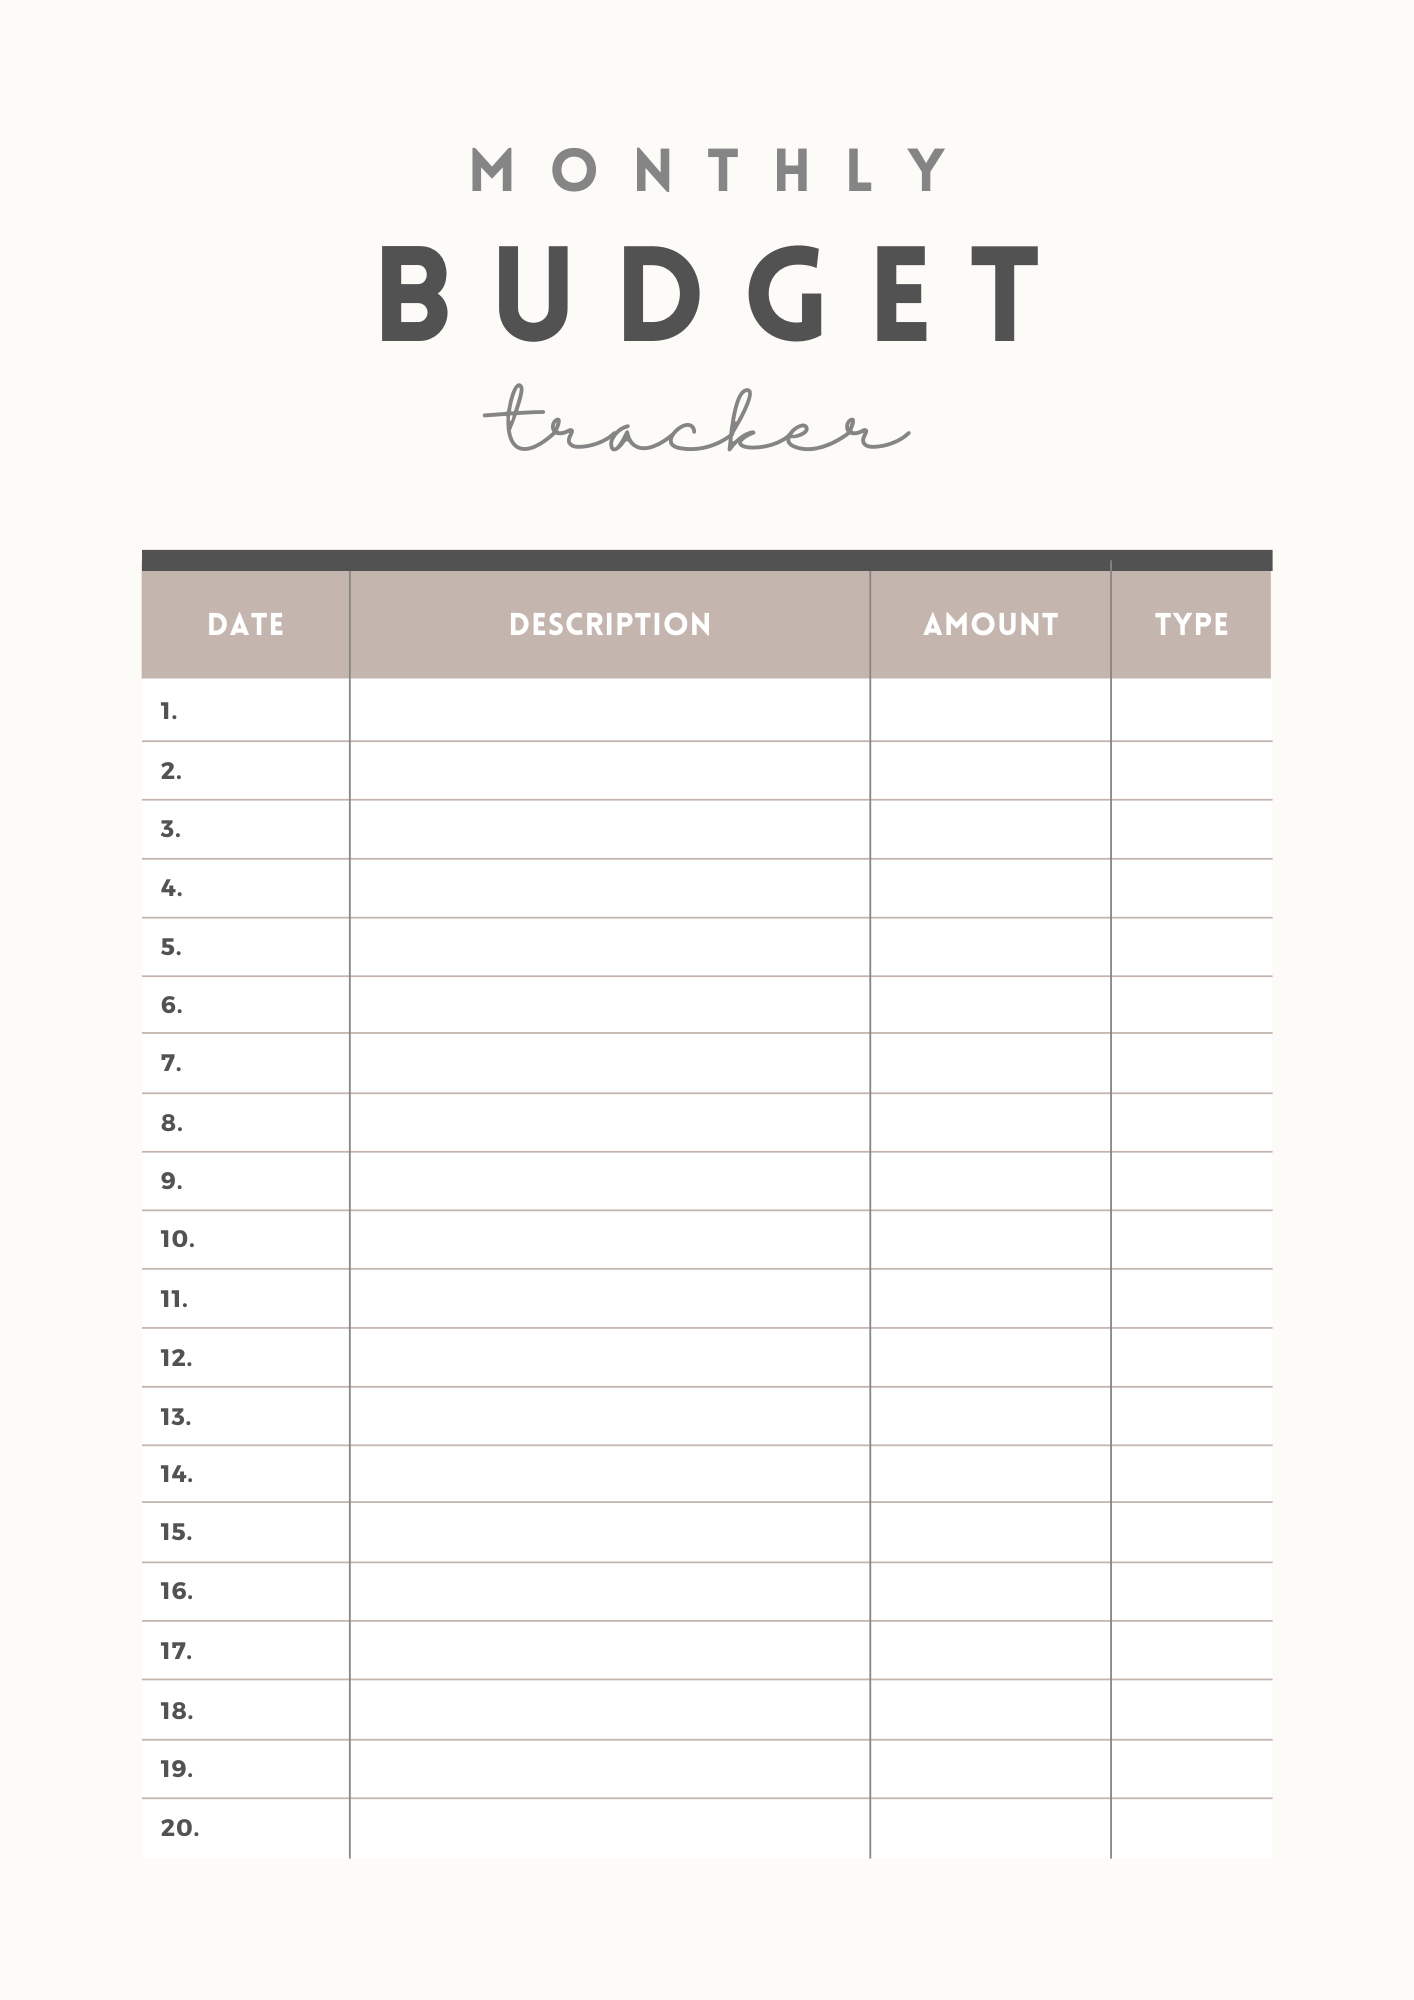 Template: Monthly Budget Planner (A4 Document)